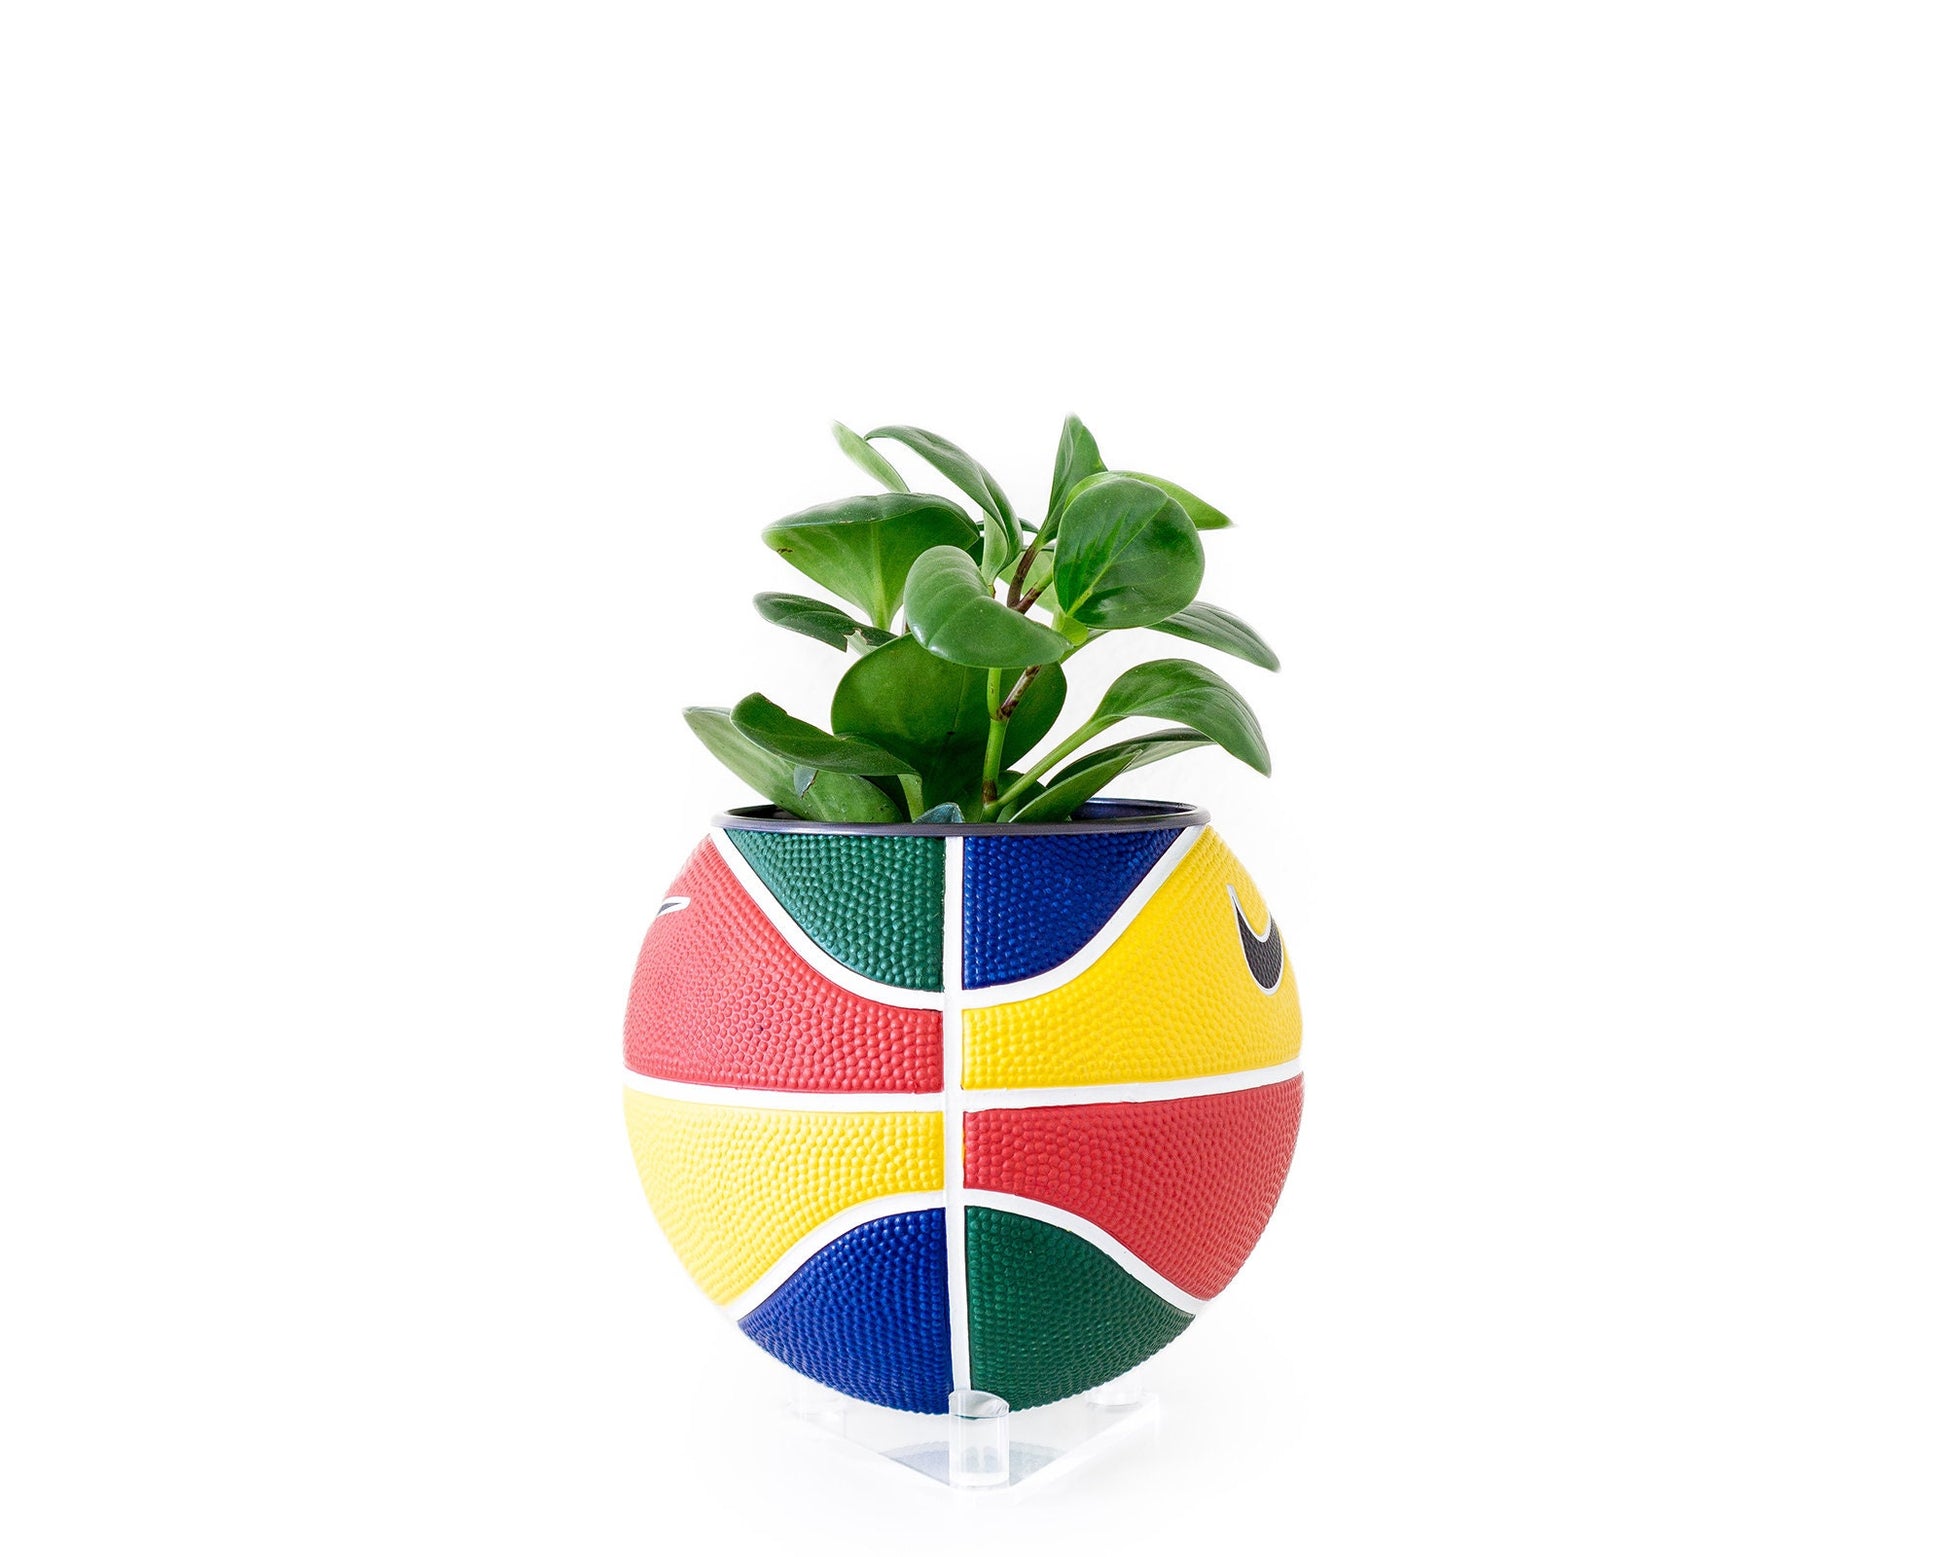 plntrs - Nike RYGB colorful Swoosh Mini Basketball Planter - new ball with stand